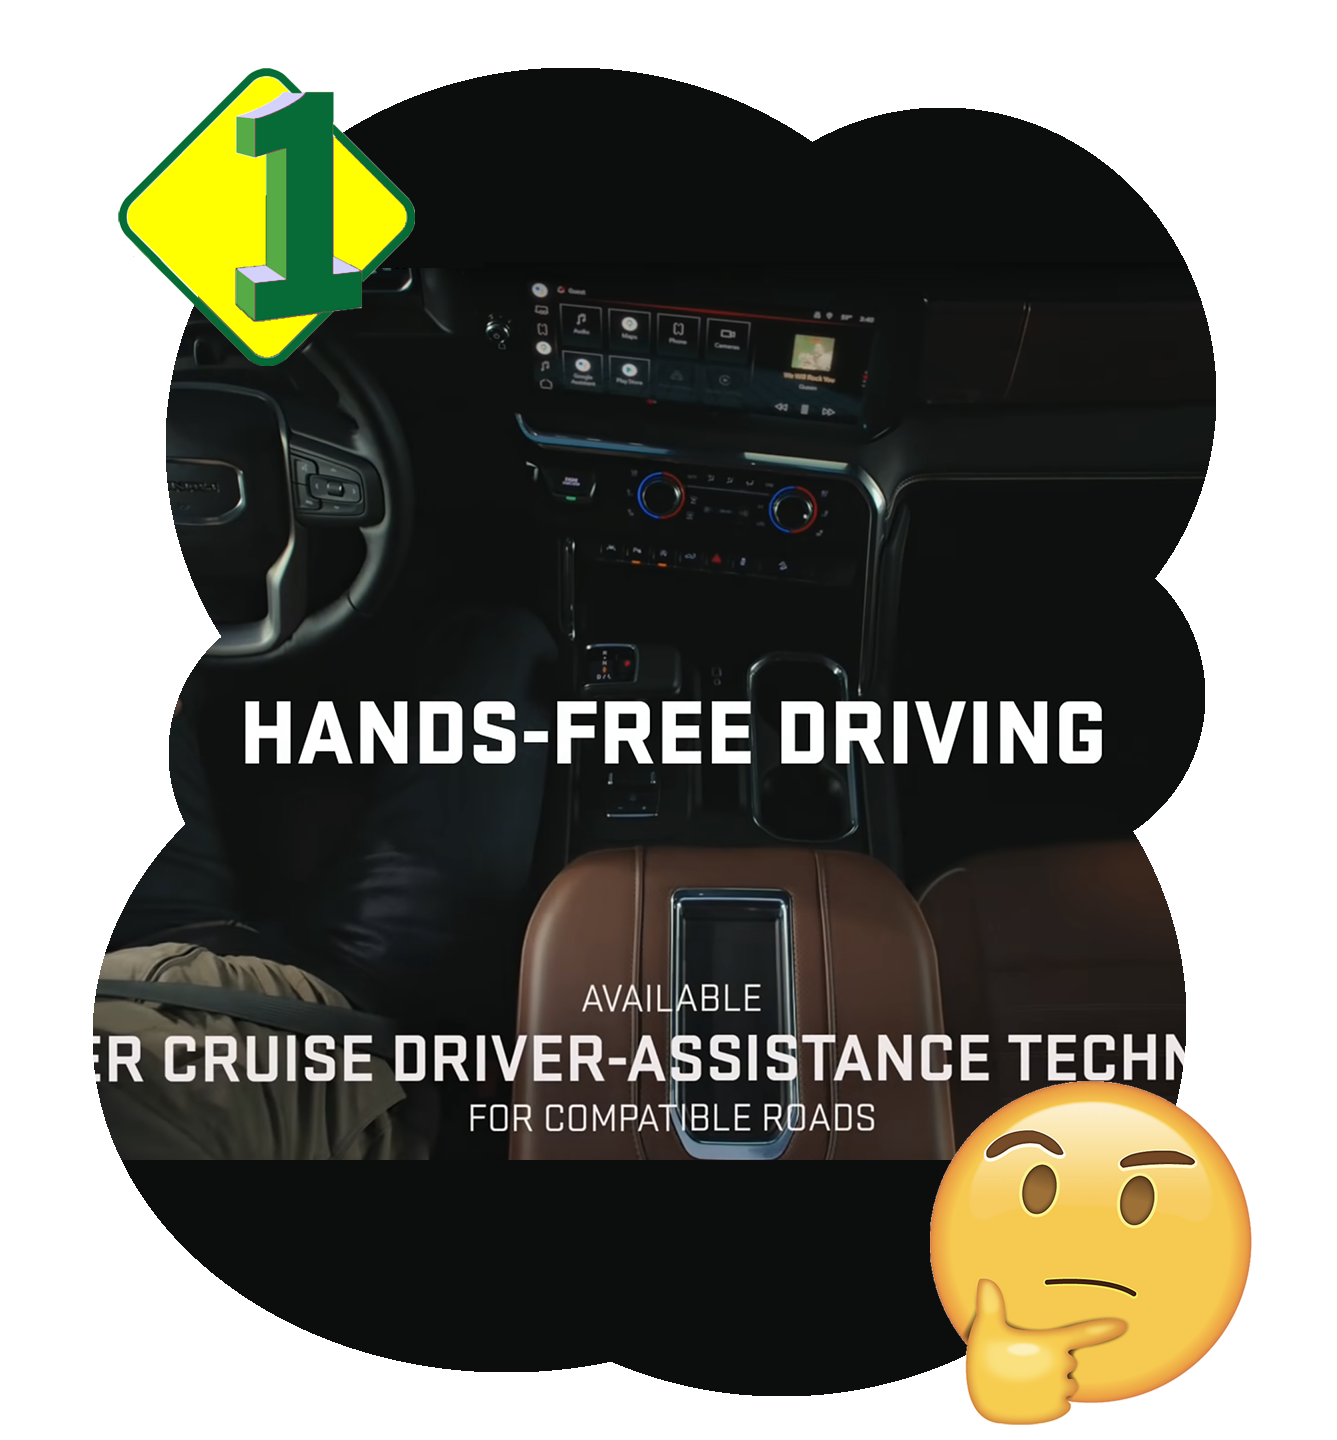 Is hands-free driving safe for use on our roadways?